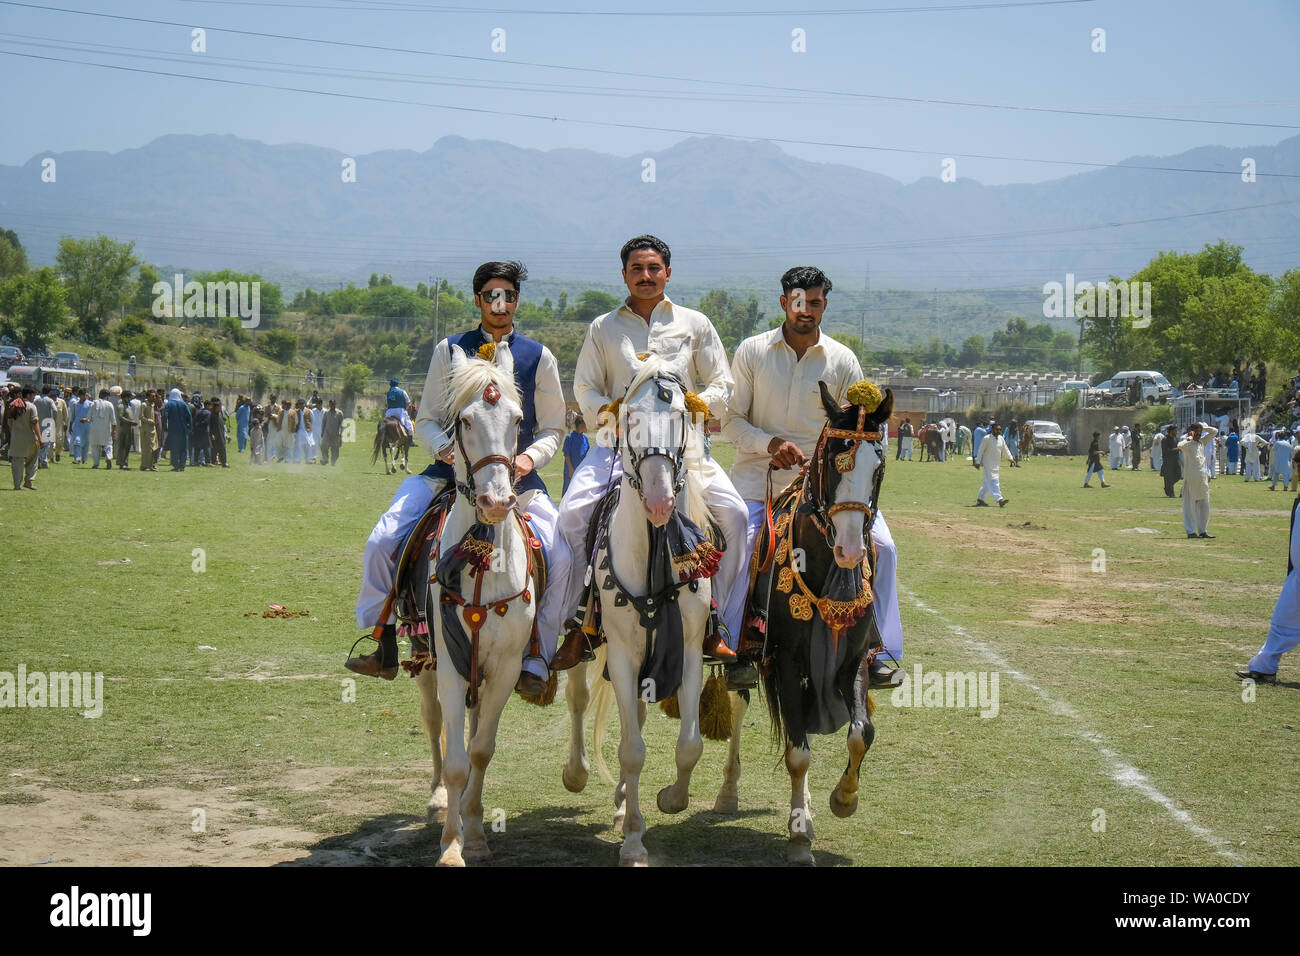 Team of Tent Pegging riders with horses gathered at cultural festival before the competition Stock Photo